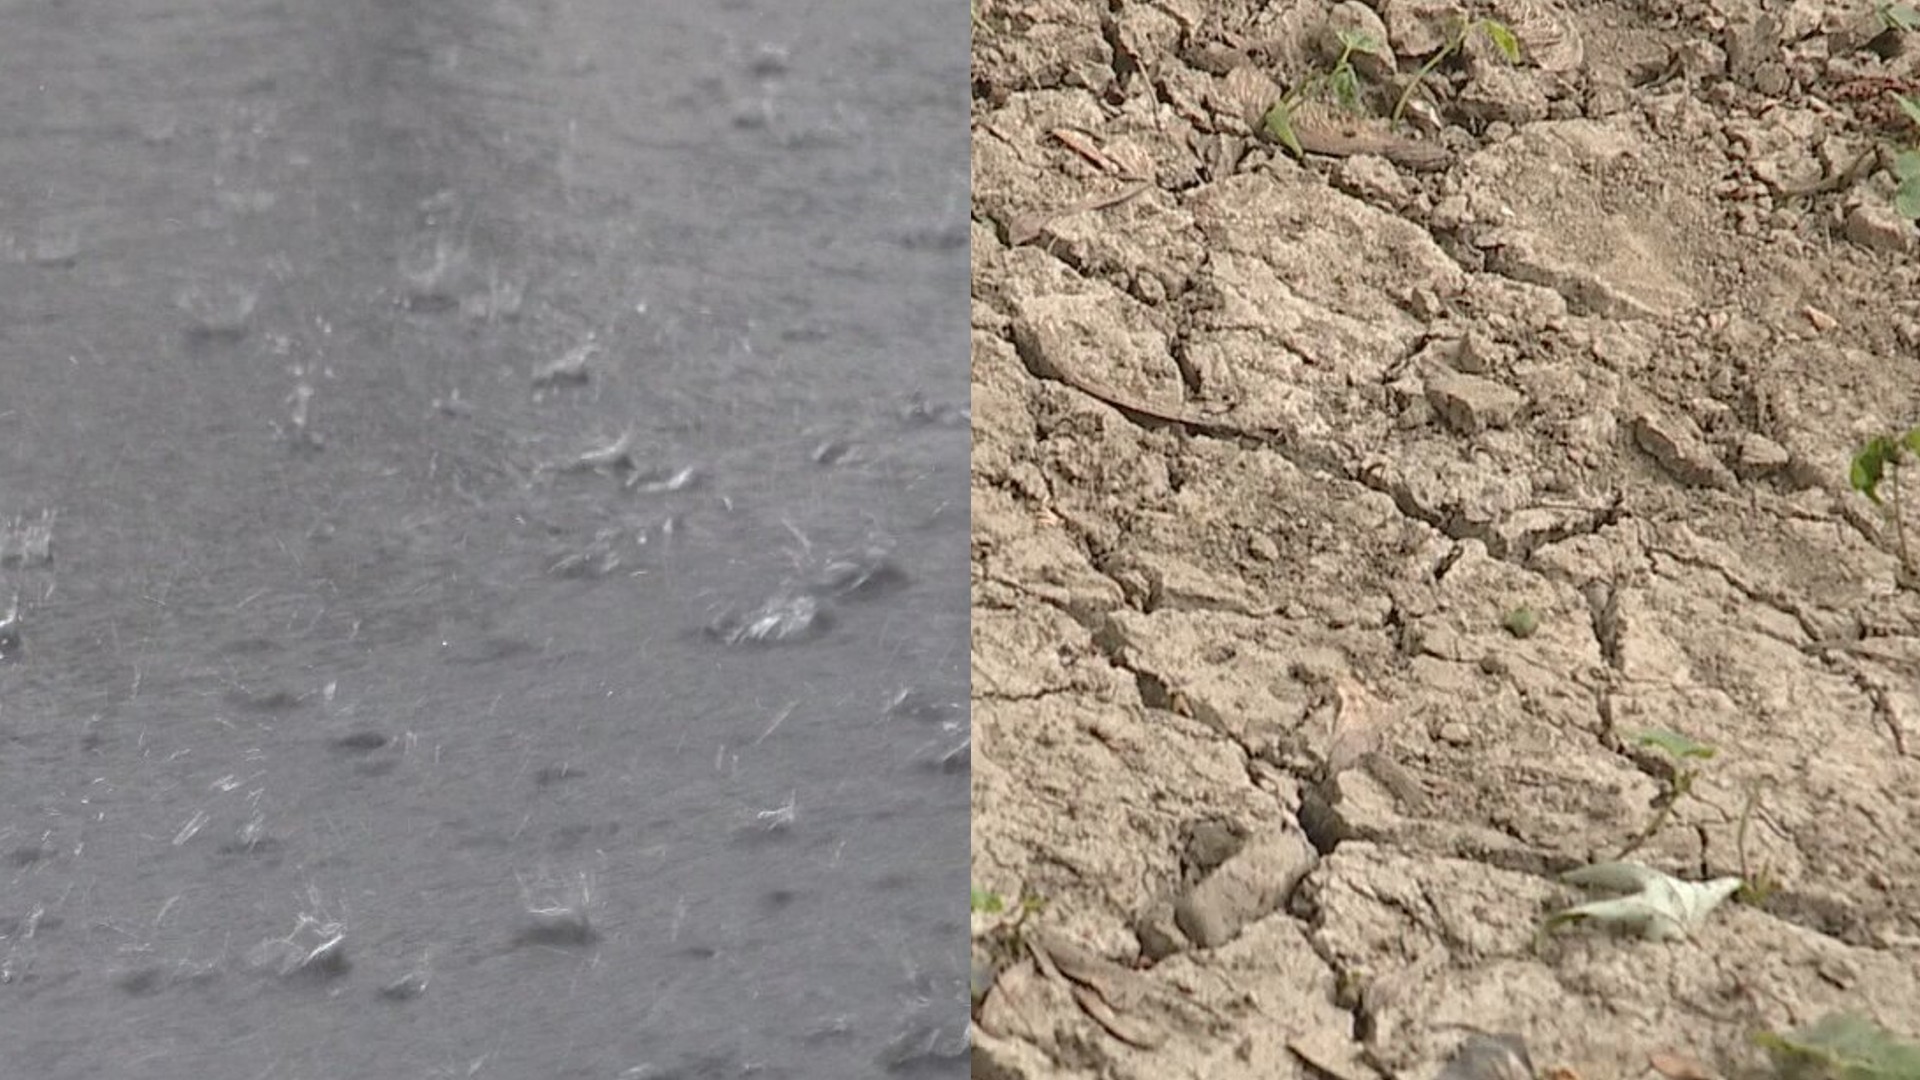 Experts say several weeks of rain is needed to alleviate dry conditions that have caused burn bans and water shortages across the region.